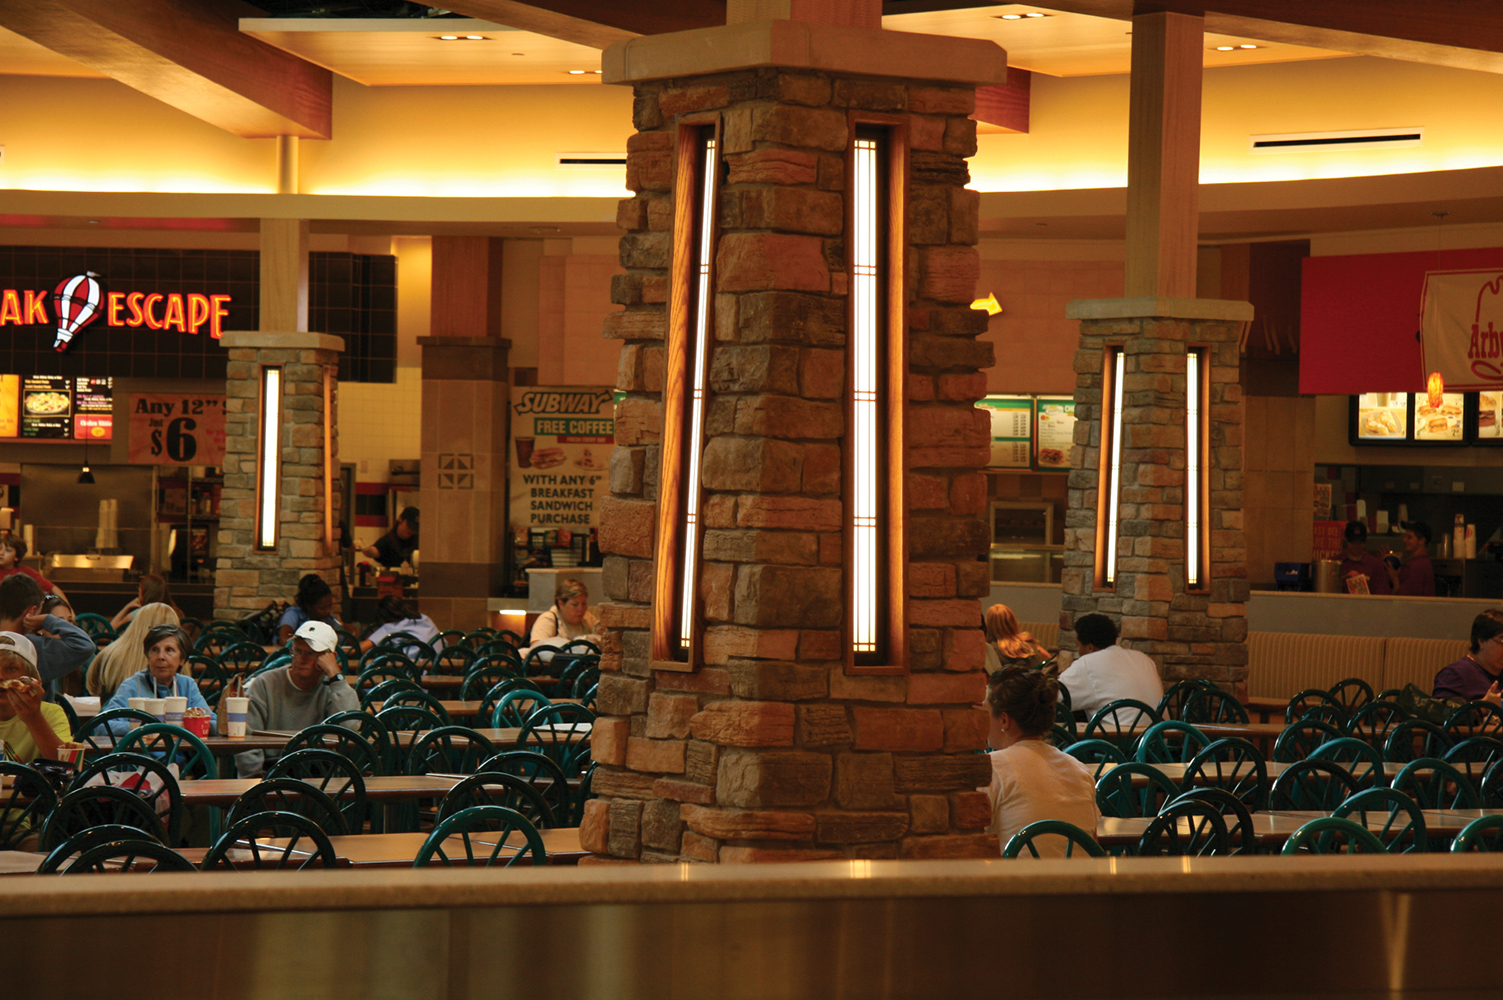 Visage sconces in a stone column provide eye-catching, modern lighting design in a busy mall food court.